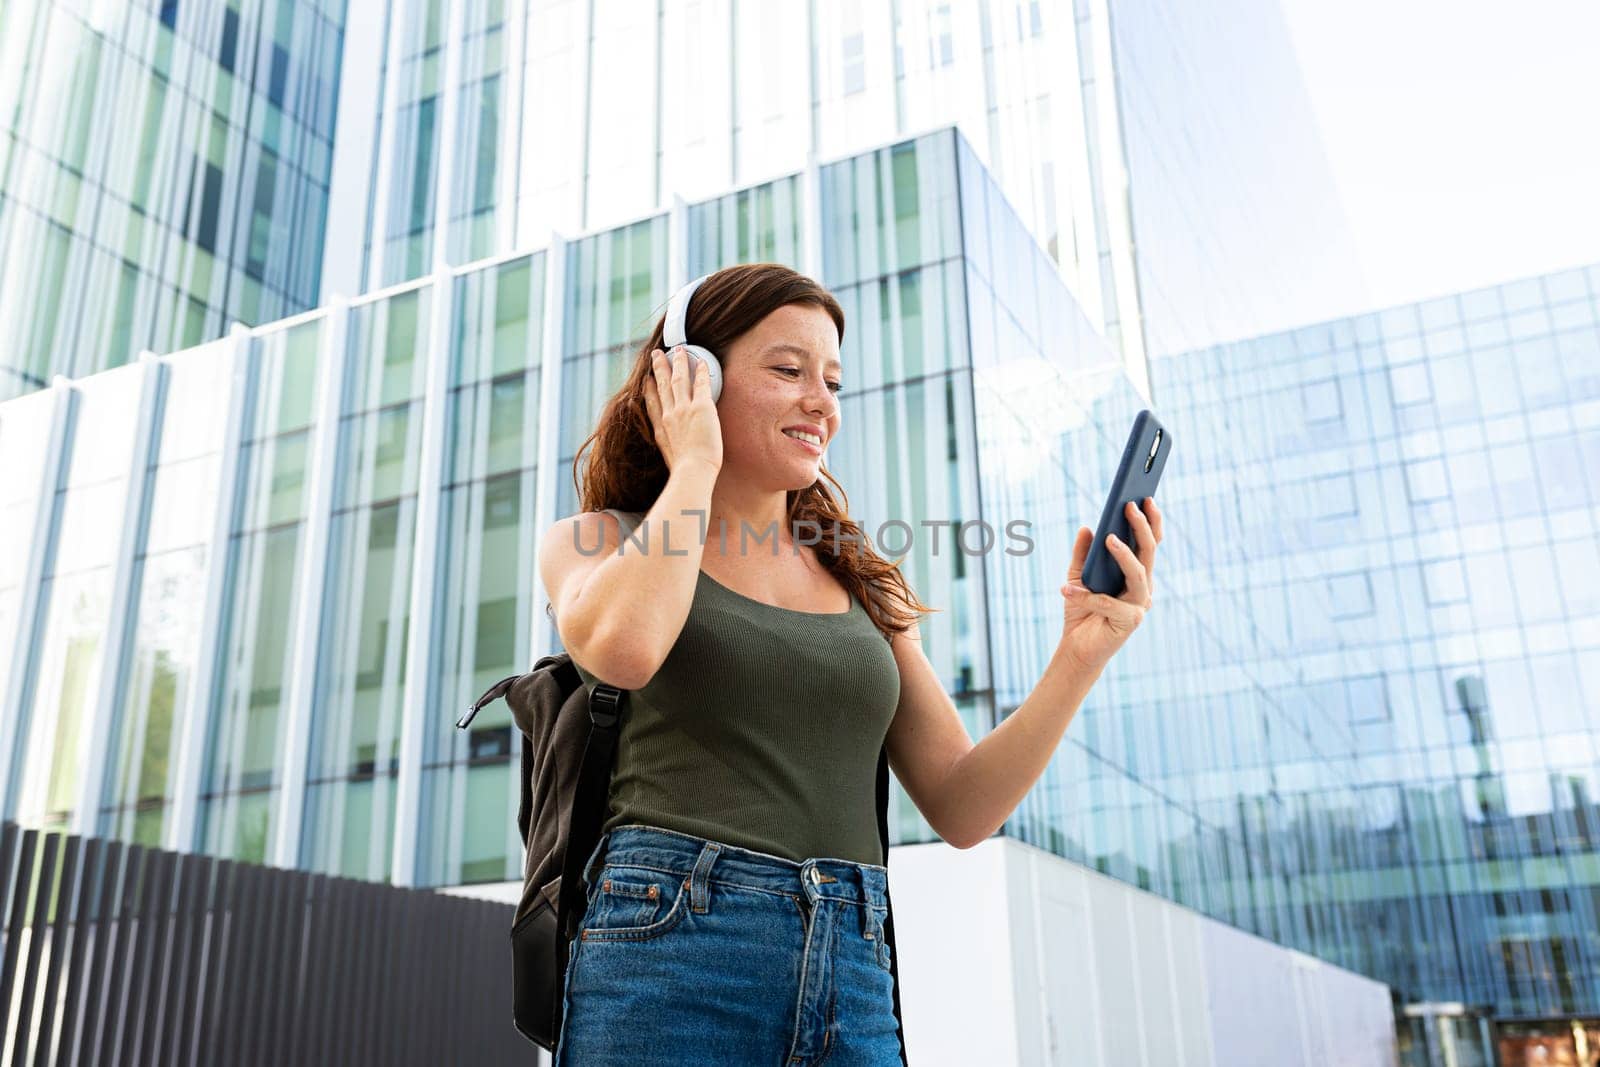 Redhead female university student listening to music using phone app and headphones in college campus. Copy space. by Hoverstock